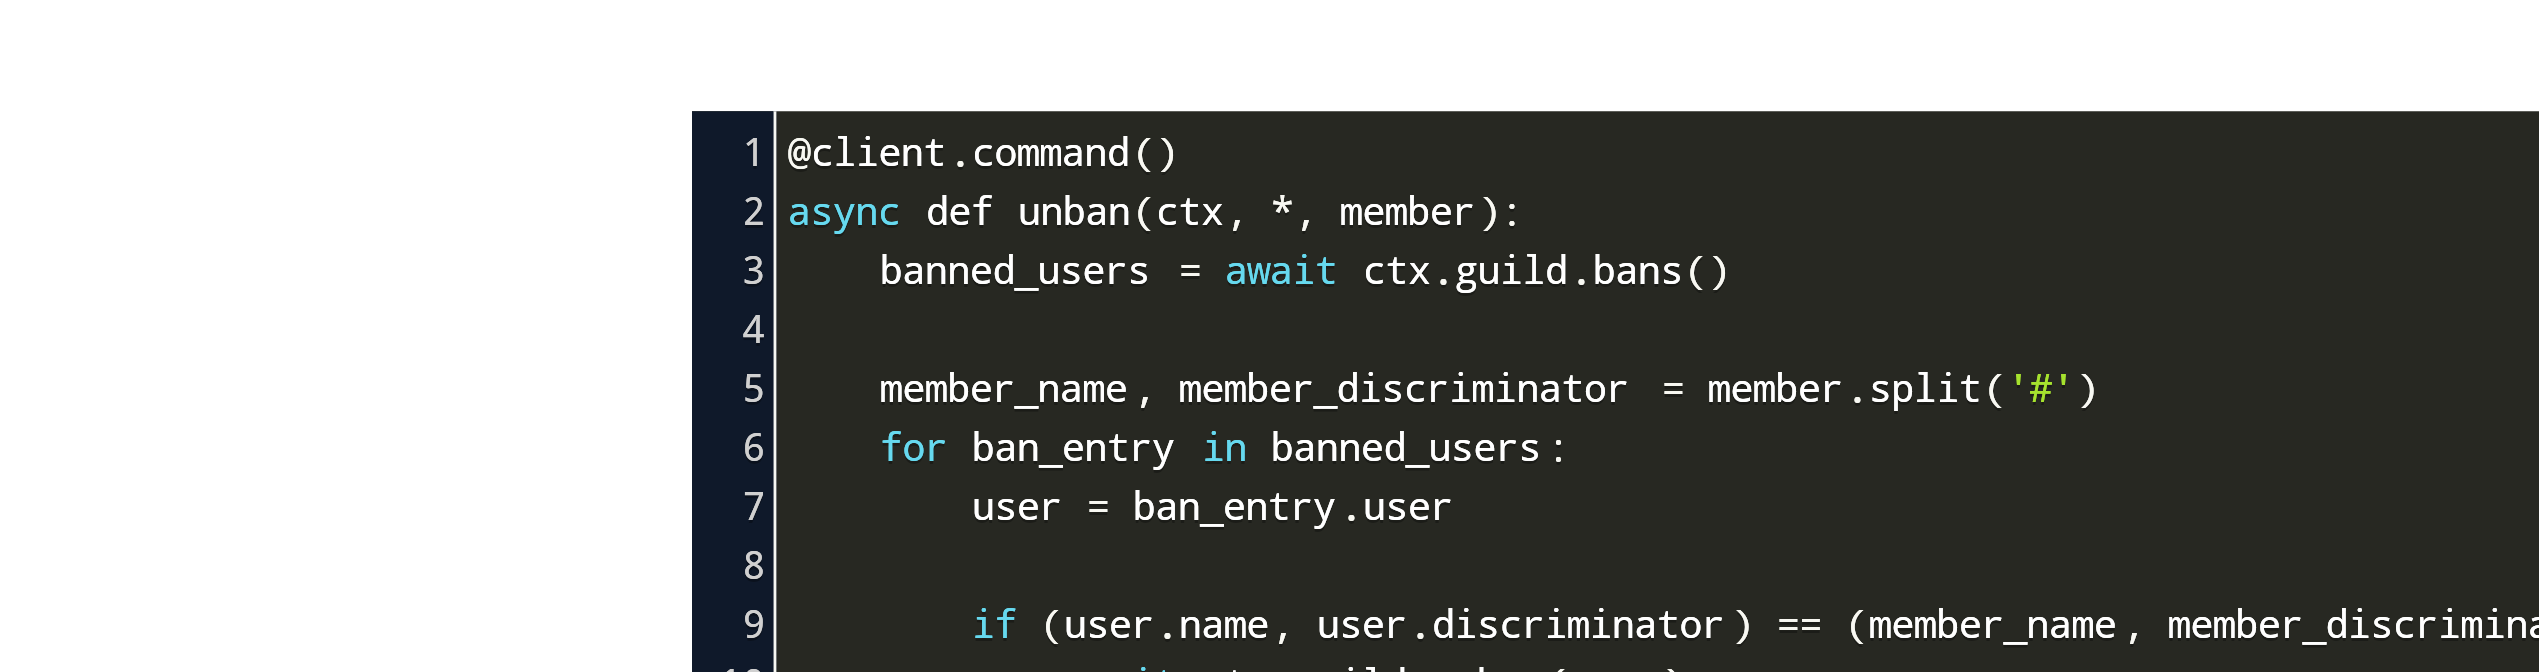 Discord Py Unban Command Code Example - how to unban yourself on a game using roblox studio